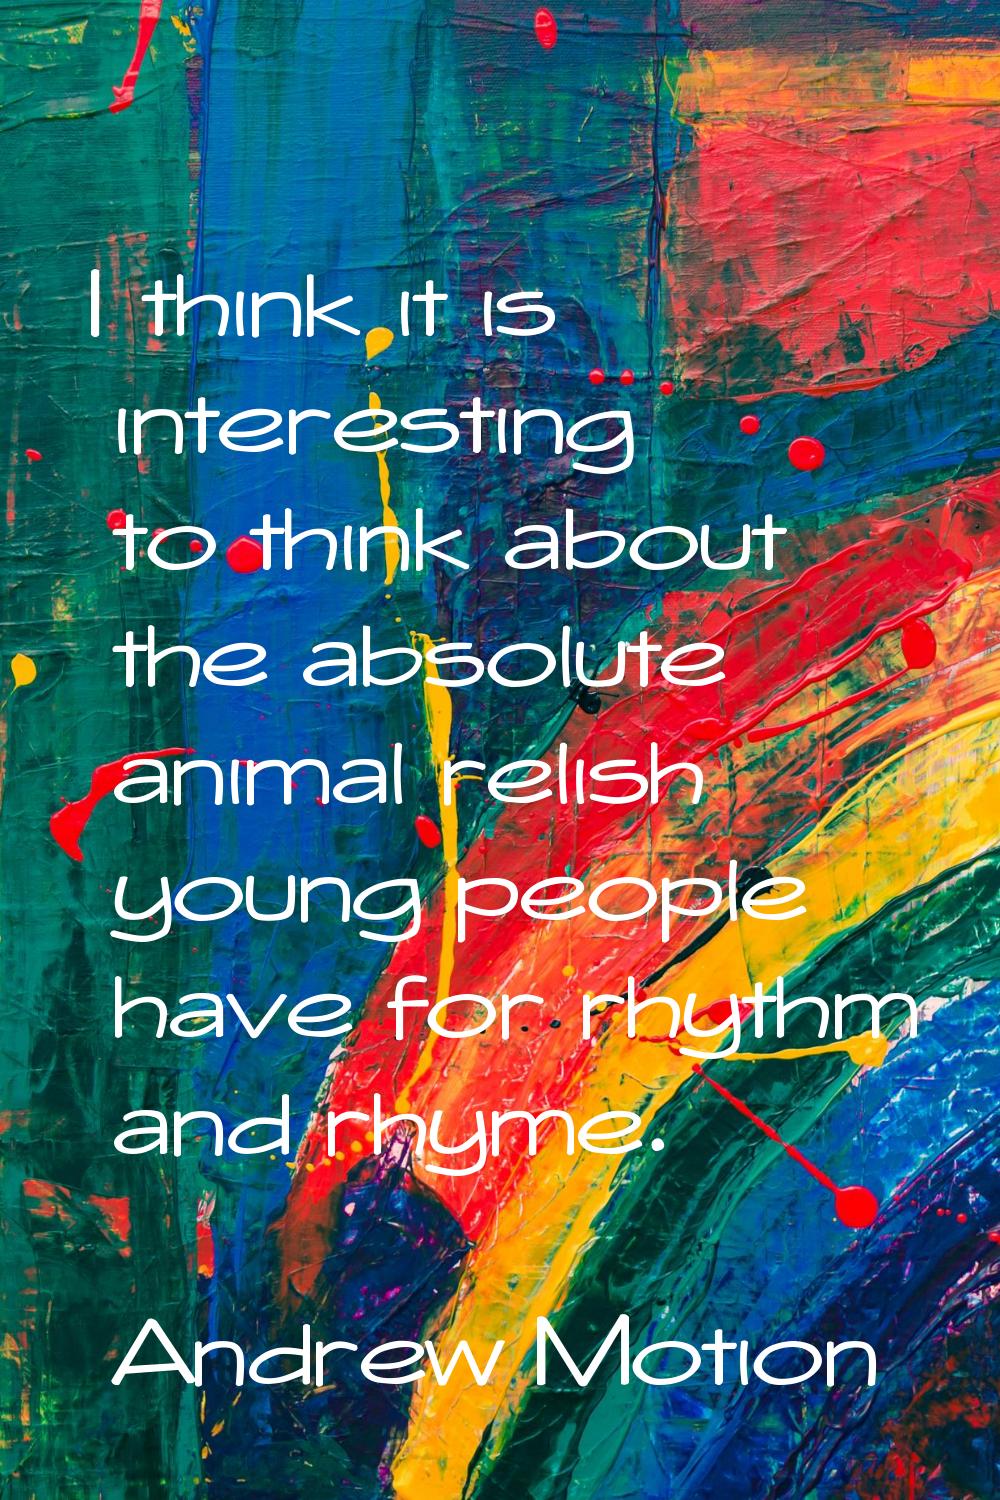 I think it is interesting to think about the absolute animal relish young people have for rhythm an